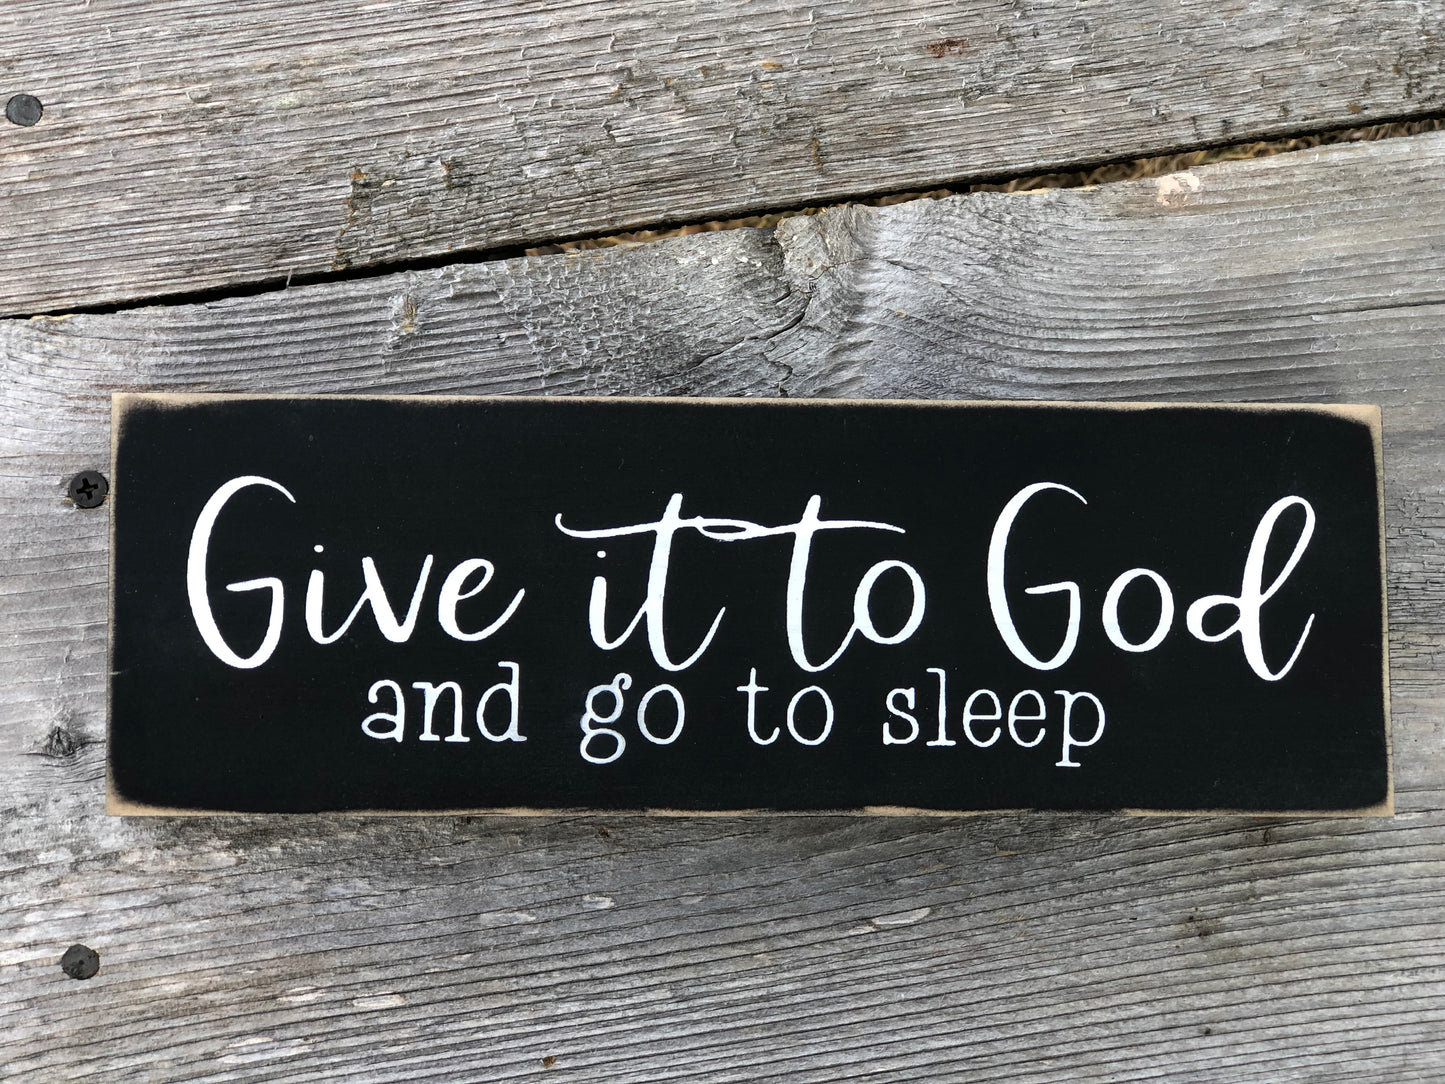 DOUBLE SIDED- GIVE IT TO GOD AND GO TO SLEEP WITH OPTIONS : HOPE DAISY OR REINDEER NAMES - WOOD SIGN